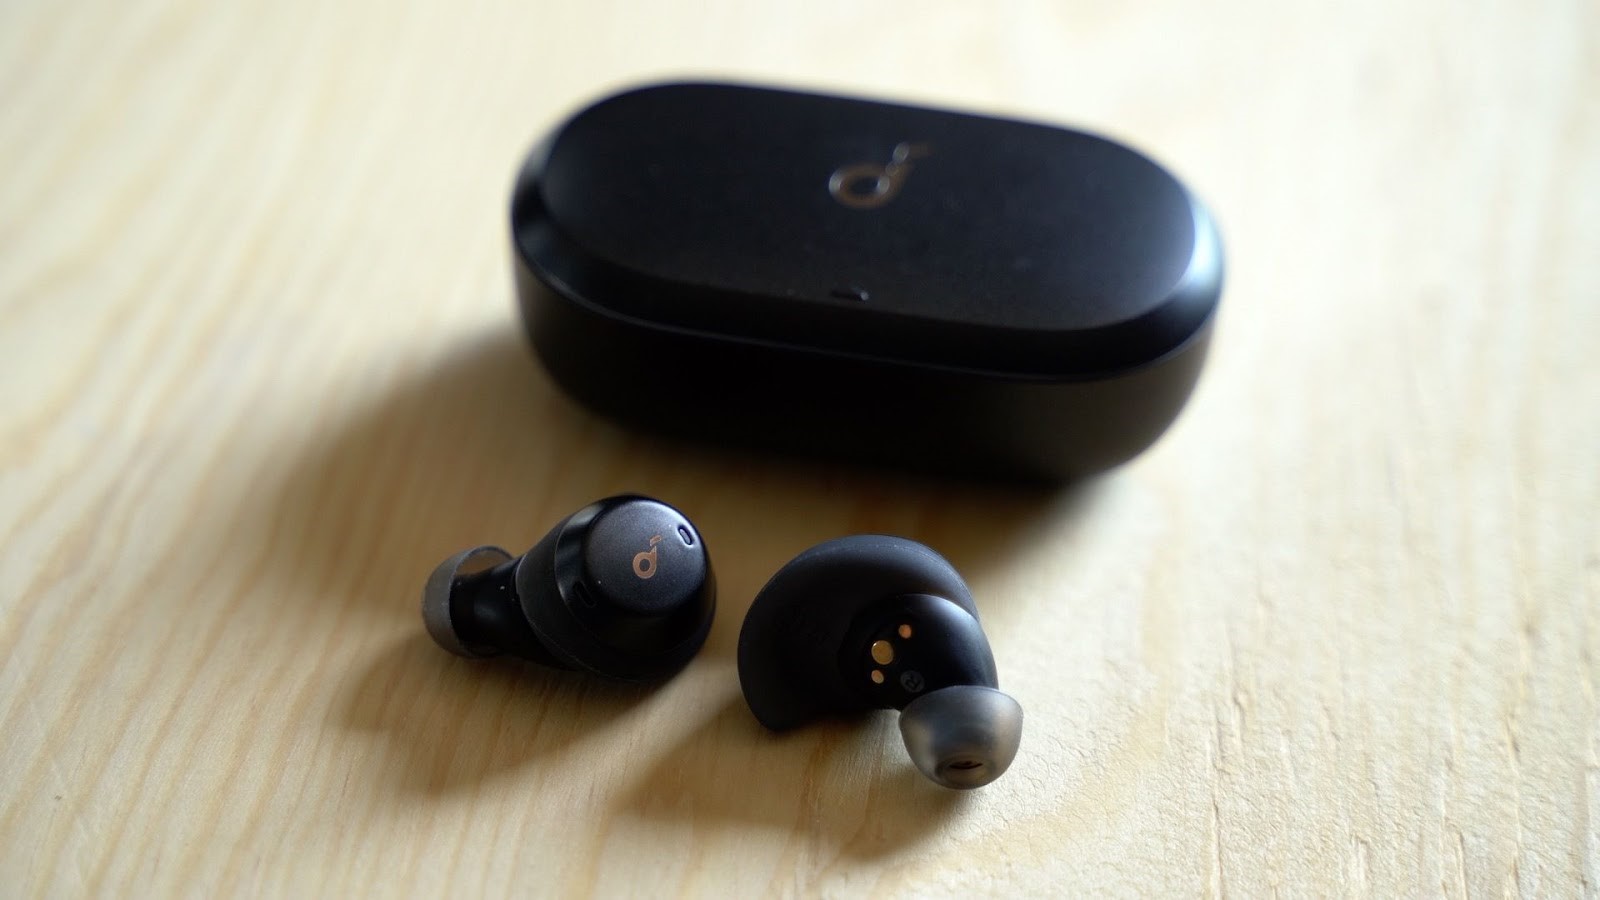 Why are earbuds a better alternative to wired headphones?